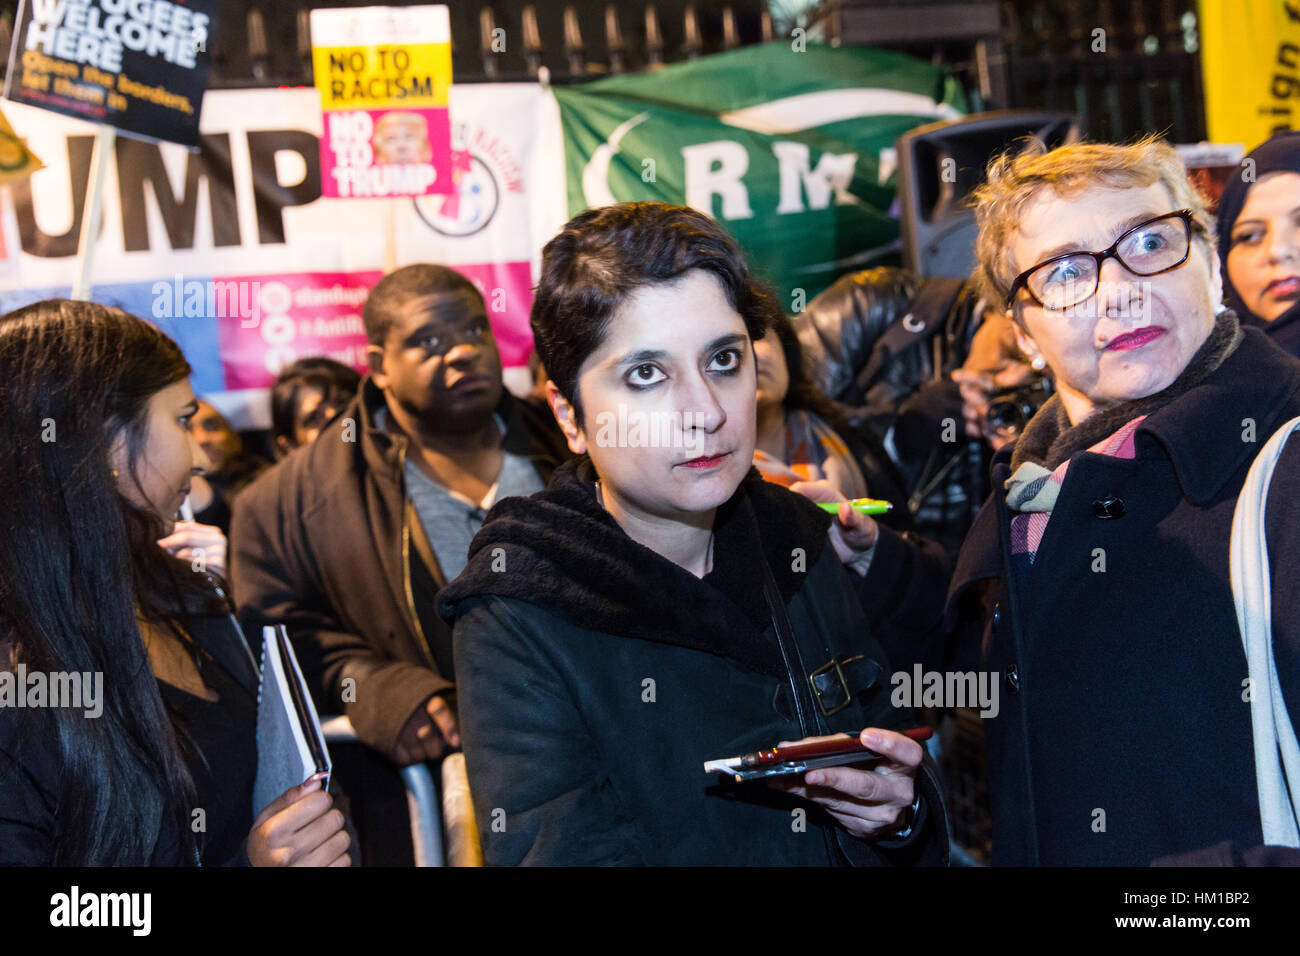 London, UK. 30th January, 2017. Thousands of people gather outside Downing Street to protest against the Muslim travel ban imposed by Donald Trump, US President,  and the lack of response by Theresa May,  UK Prime Minister.  Baroness Shami Chakrabarti. Credit Carol Moir/AlamyLiveNews Stock Photo